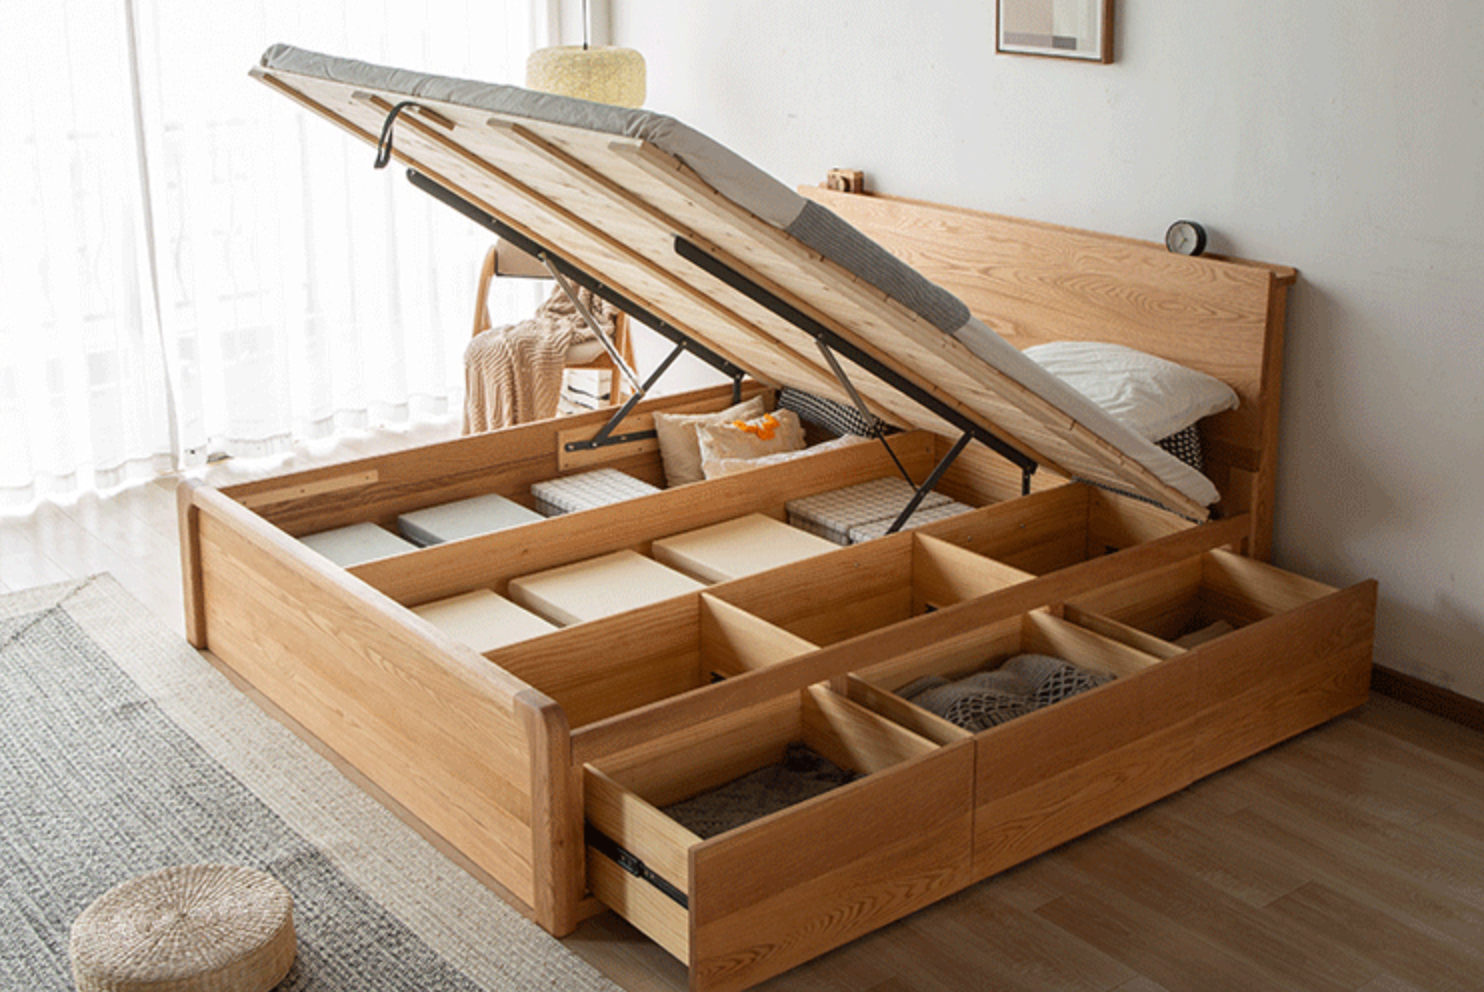 oak wood bed with drawer, hydraulic bed with storage compartments